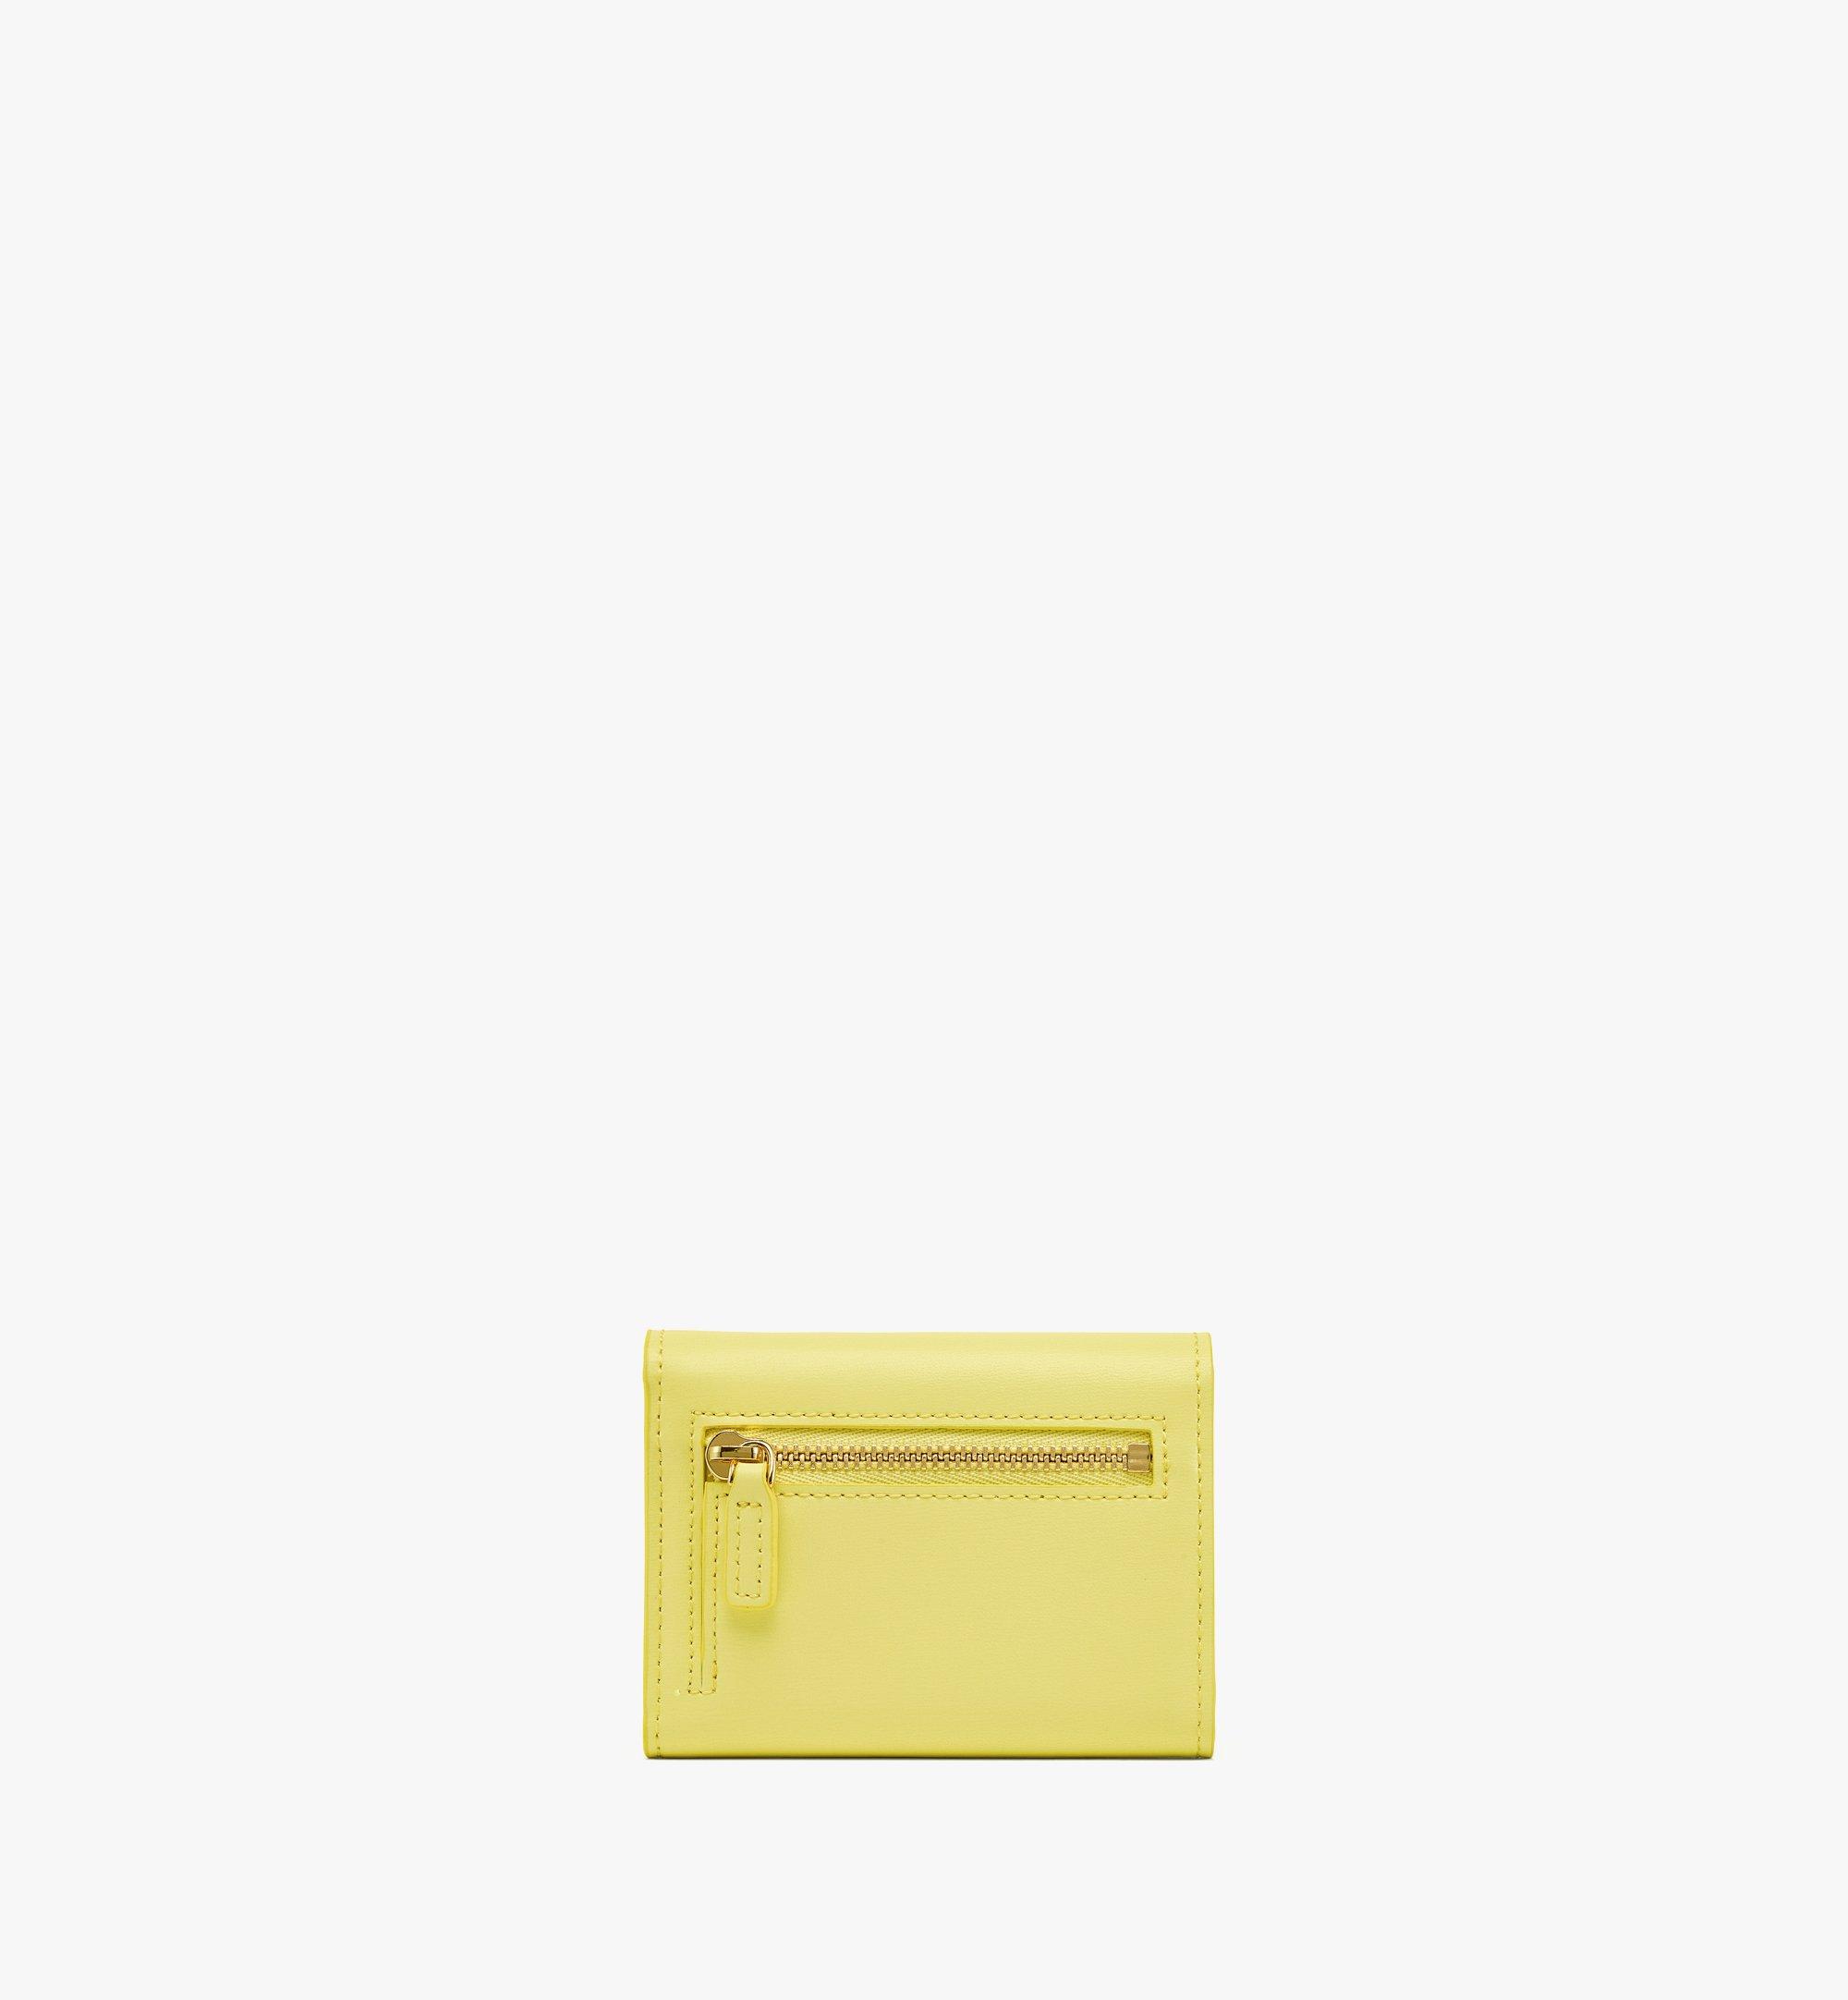 MCM Patricia Trifold Wallet in Spanish Leather Yellow MYSBAPA01Y4001 Alternate View 2